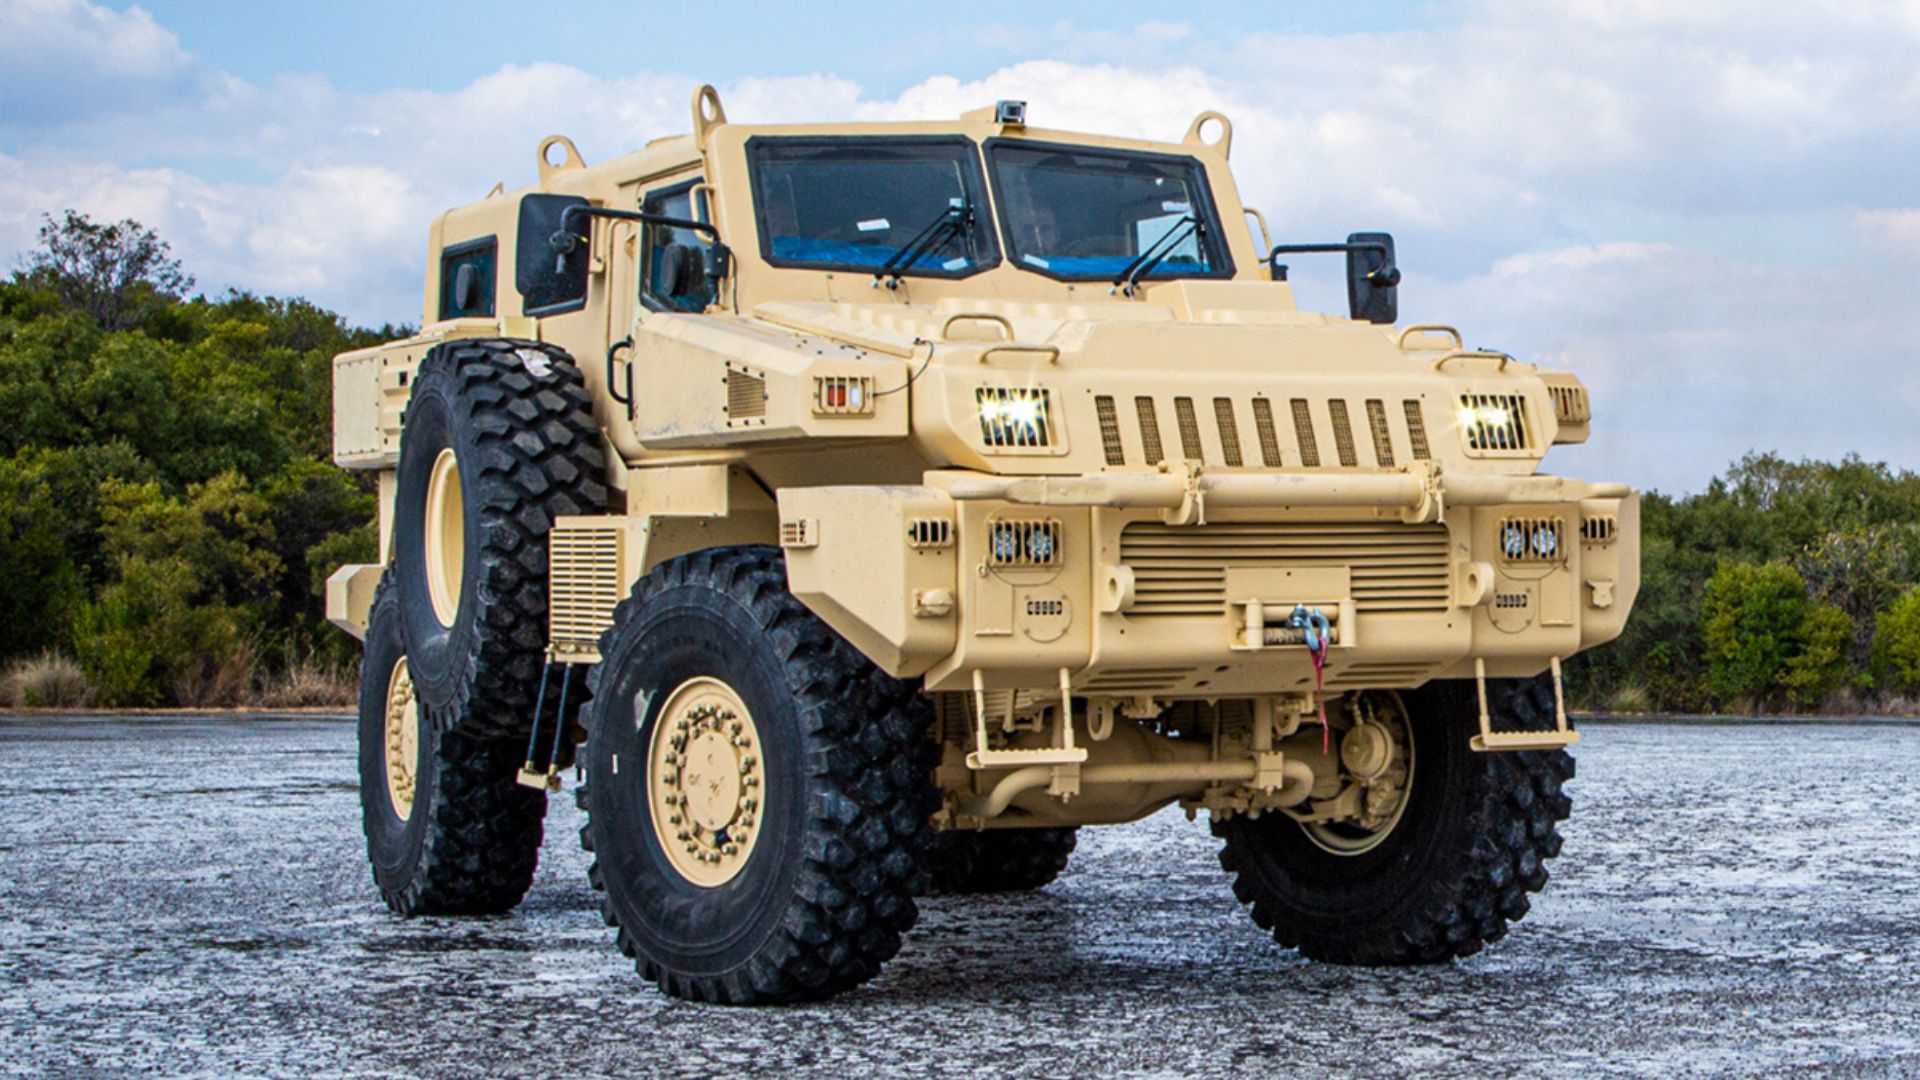 The Marauder Is An Amazing Military Vehicle You Can Own